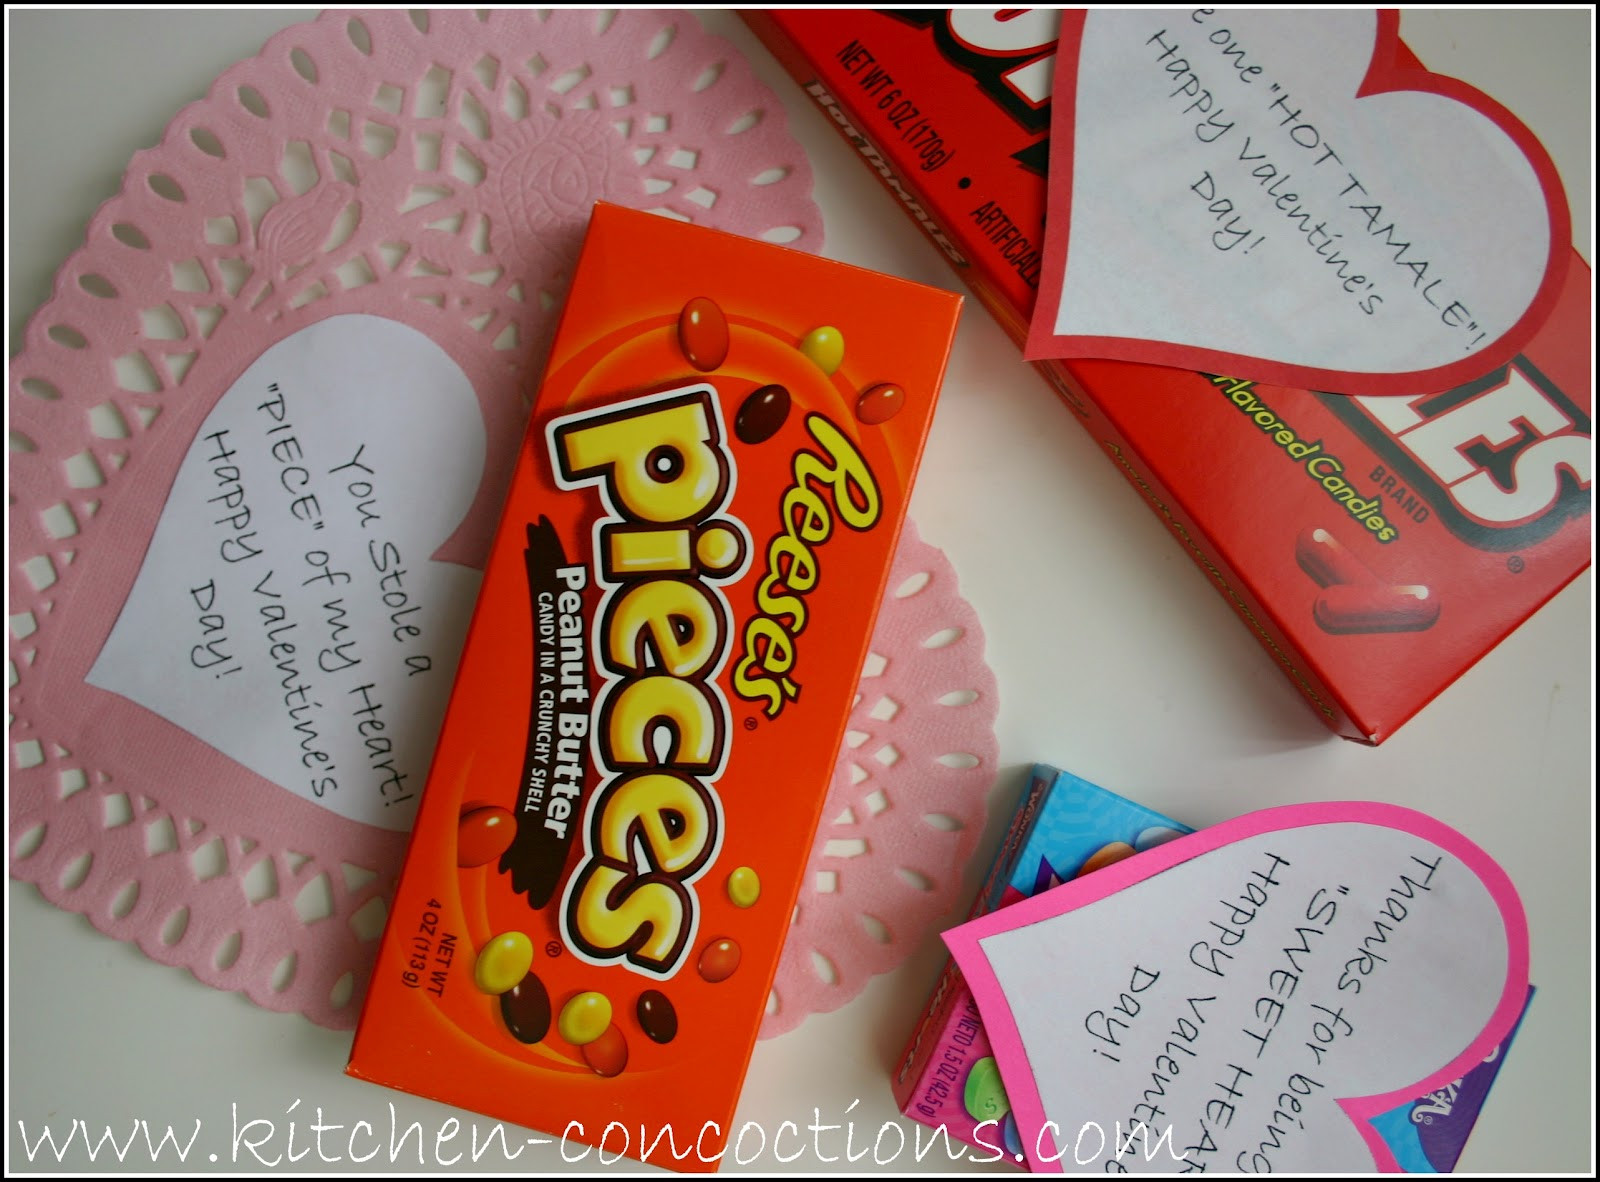 Valentines Day Candy Cards
 How To Valentine s Day Candy Cards Kitchen Concoctions